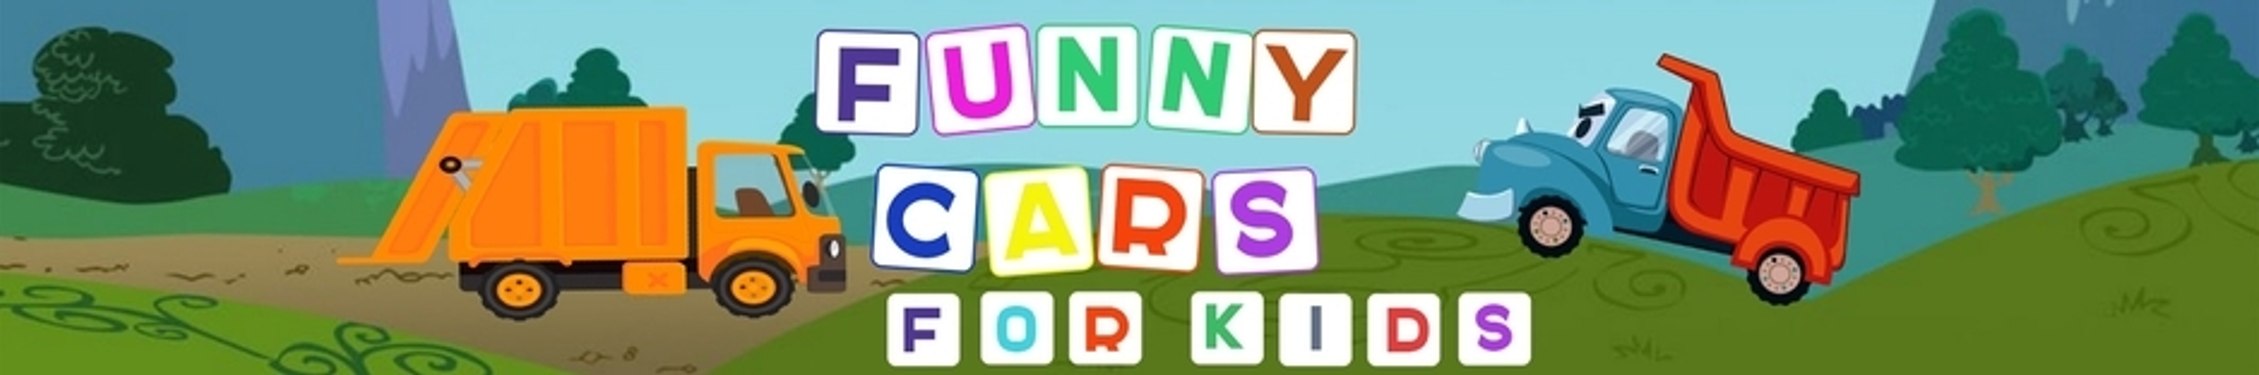 Funny Cars For Kids